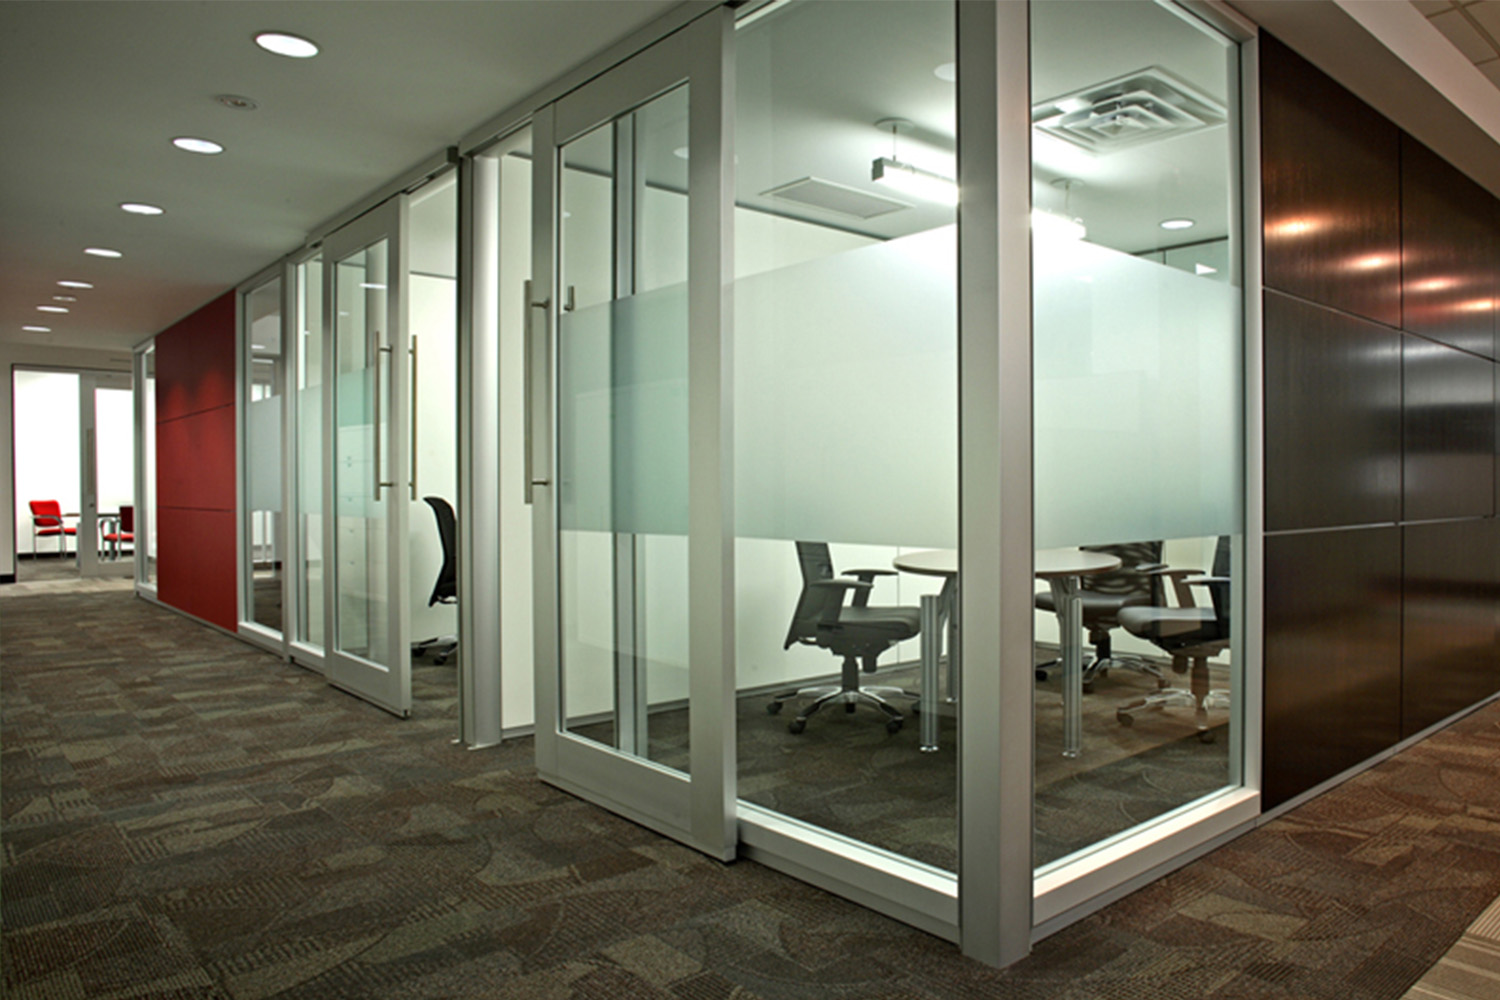 view of an office space with large glass walls, seen at a corner